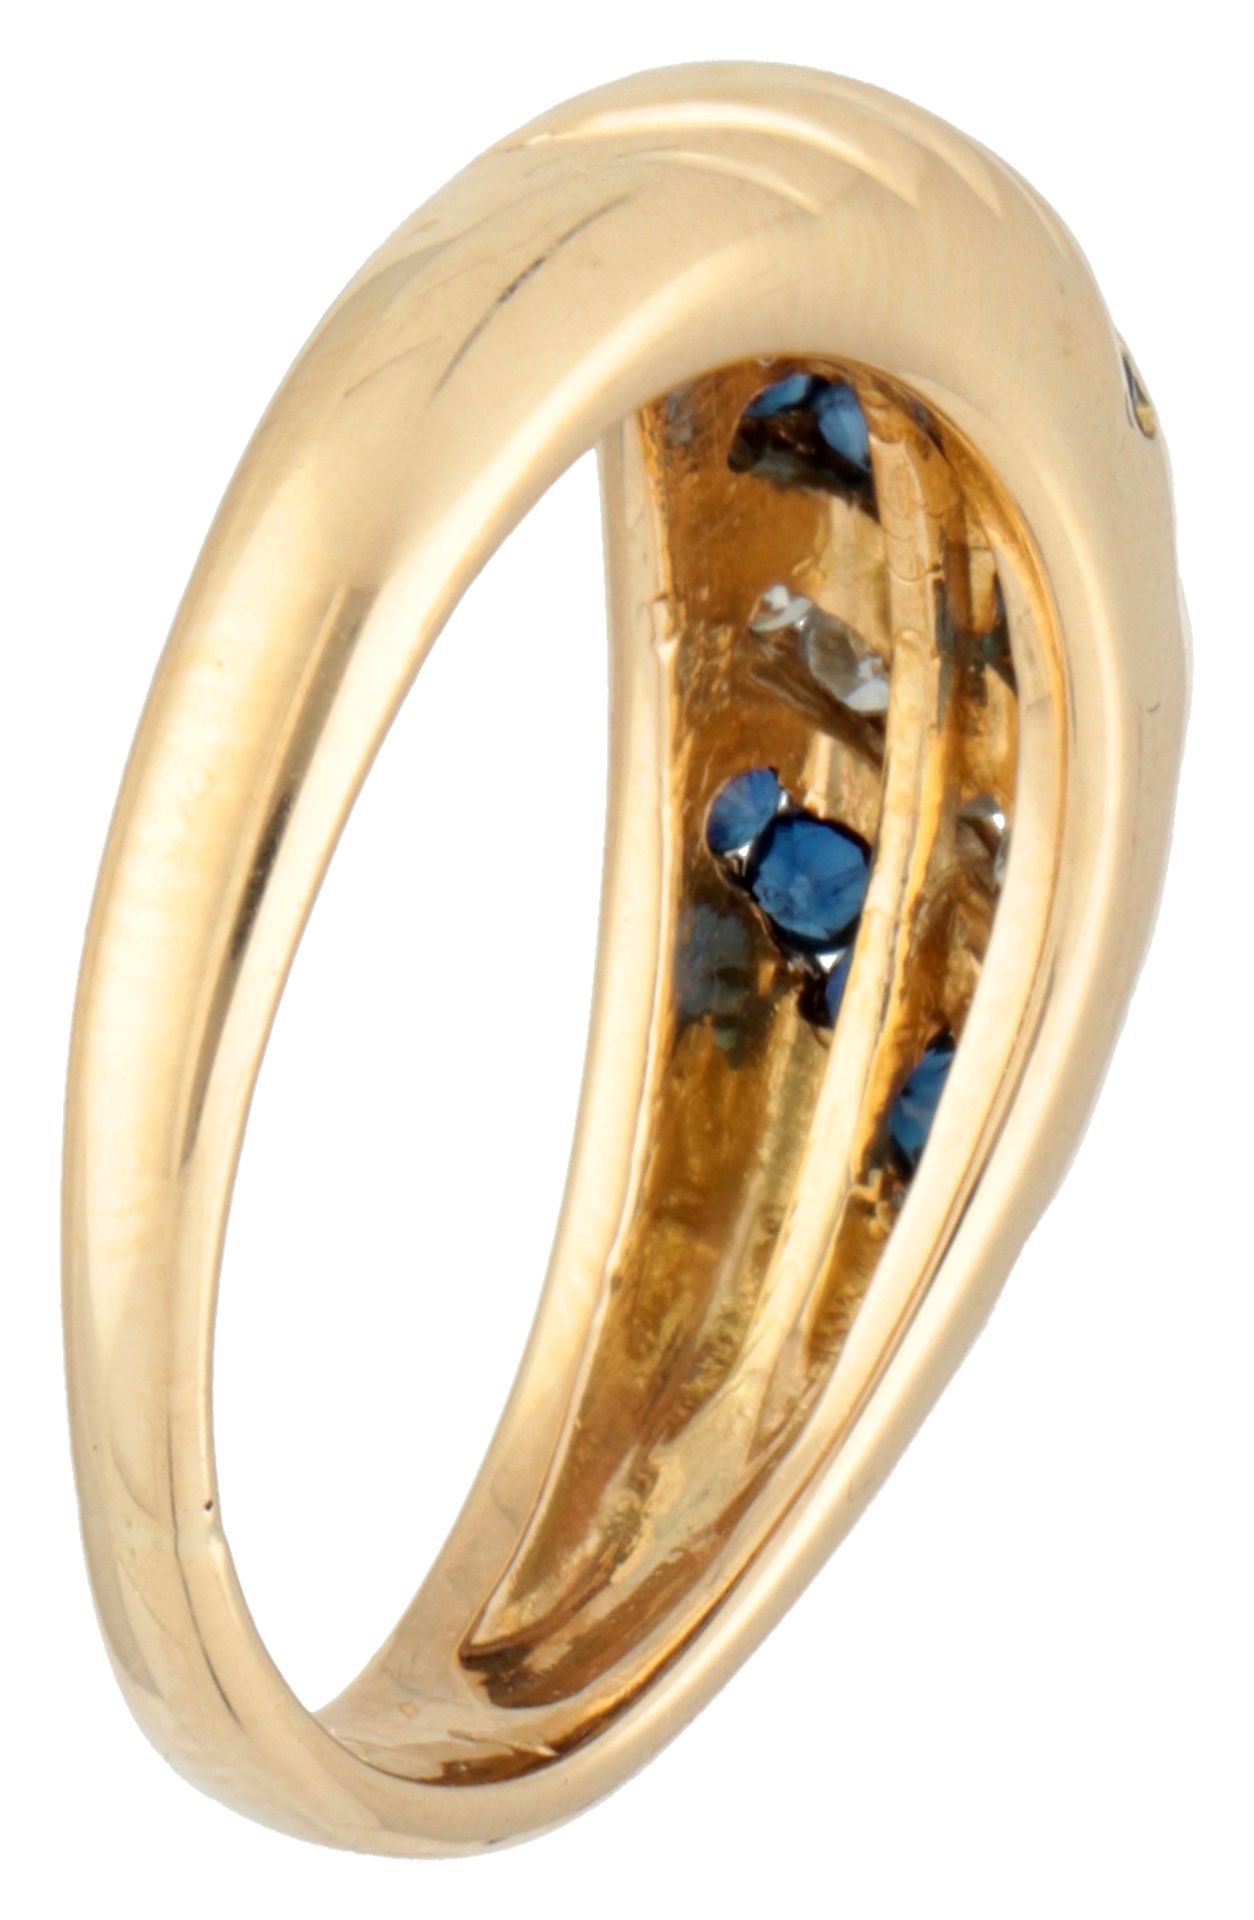 18K Yellow gold ring set with diamond and sapphire. - Image 2 of 2